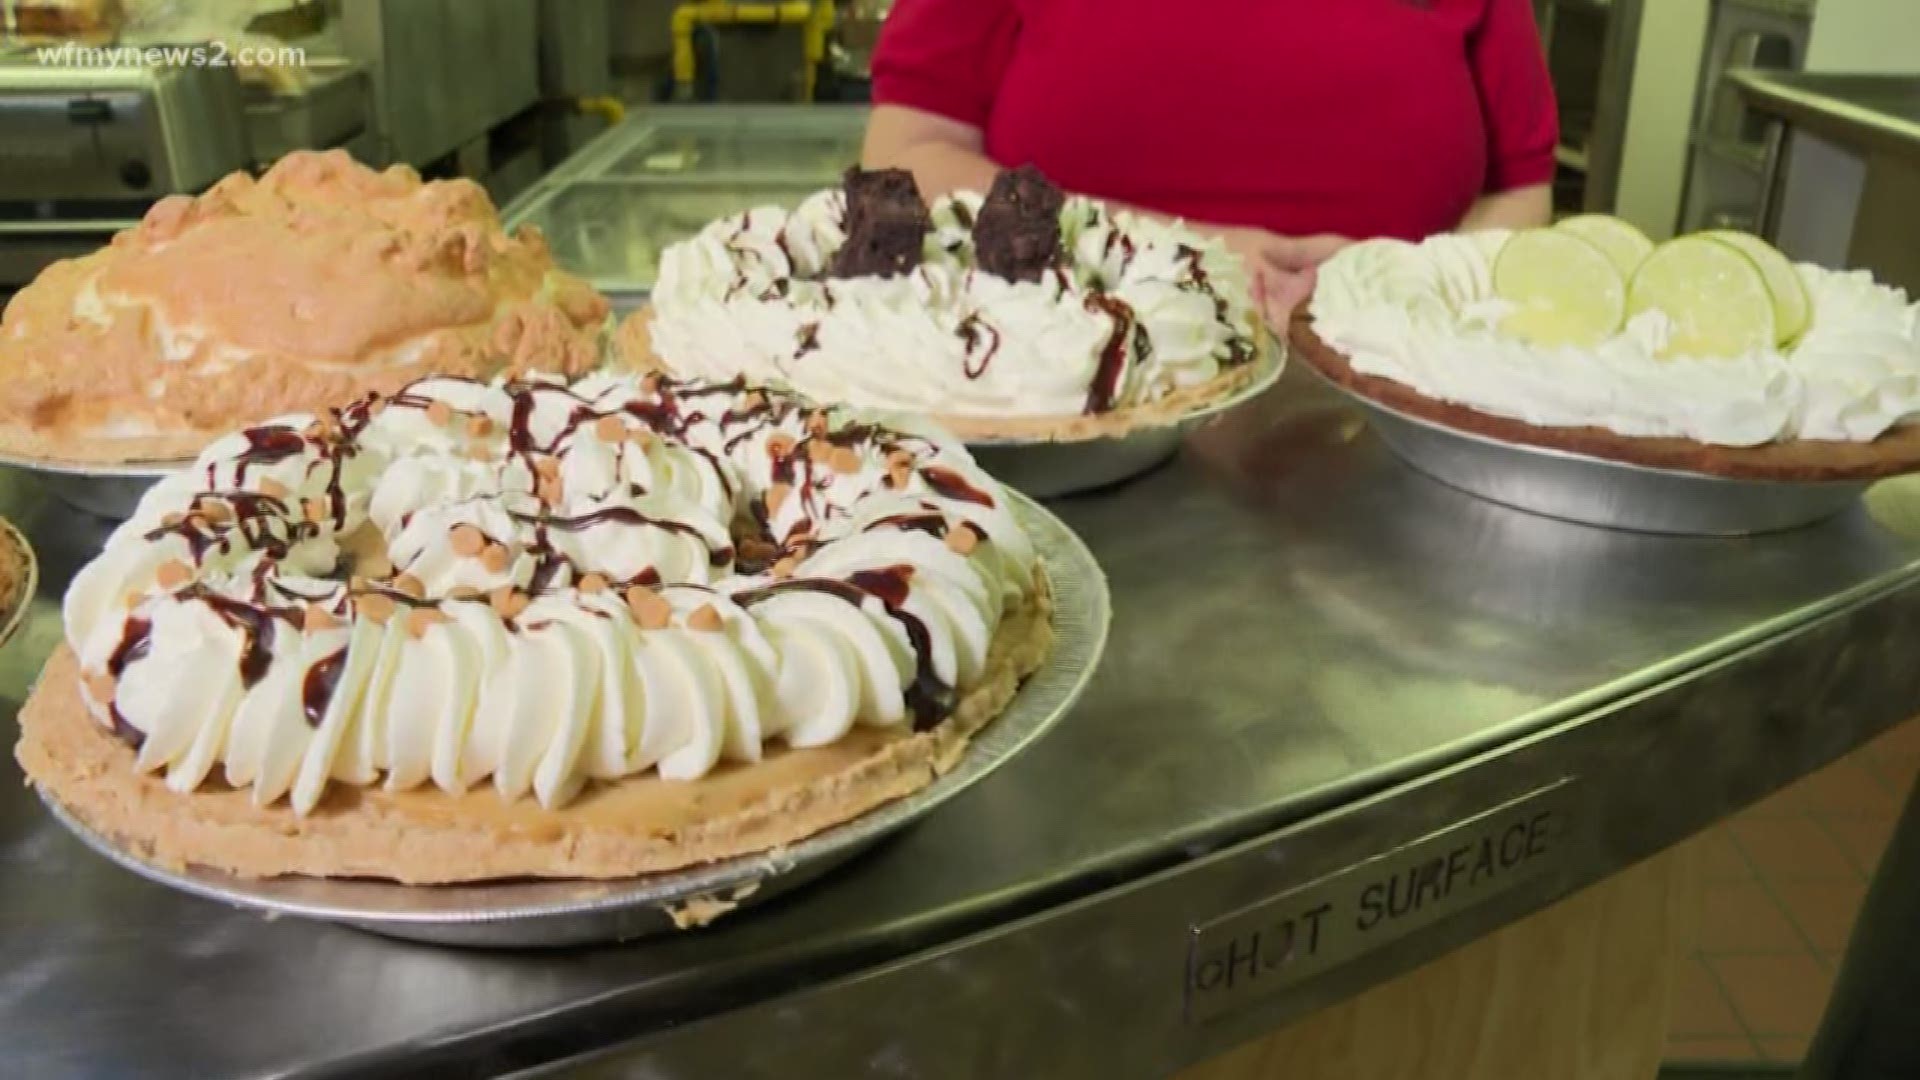 Eric Chilton makes a pit stop at the Cherry Pit Café in honor of National Pie Day.